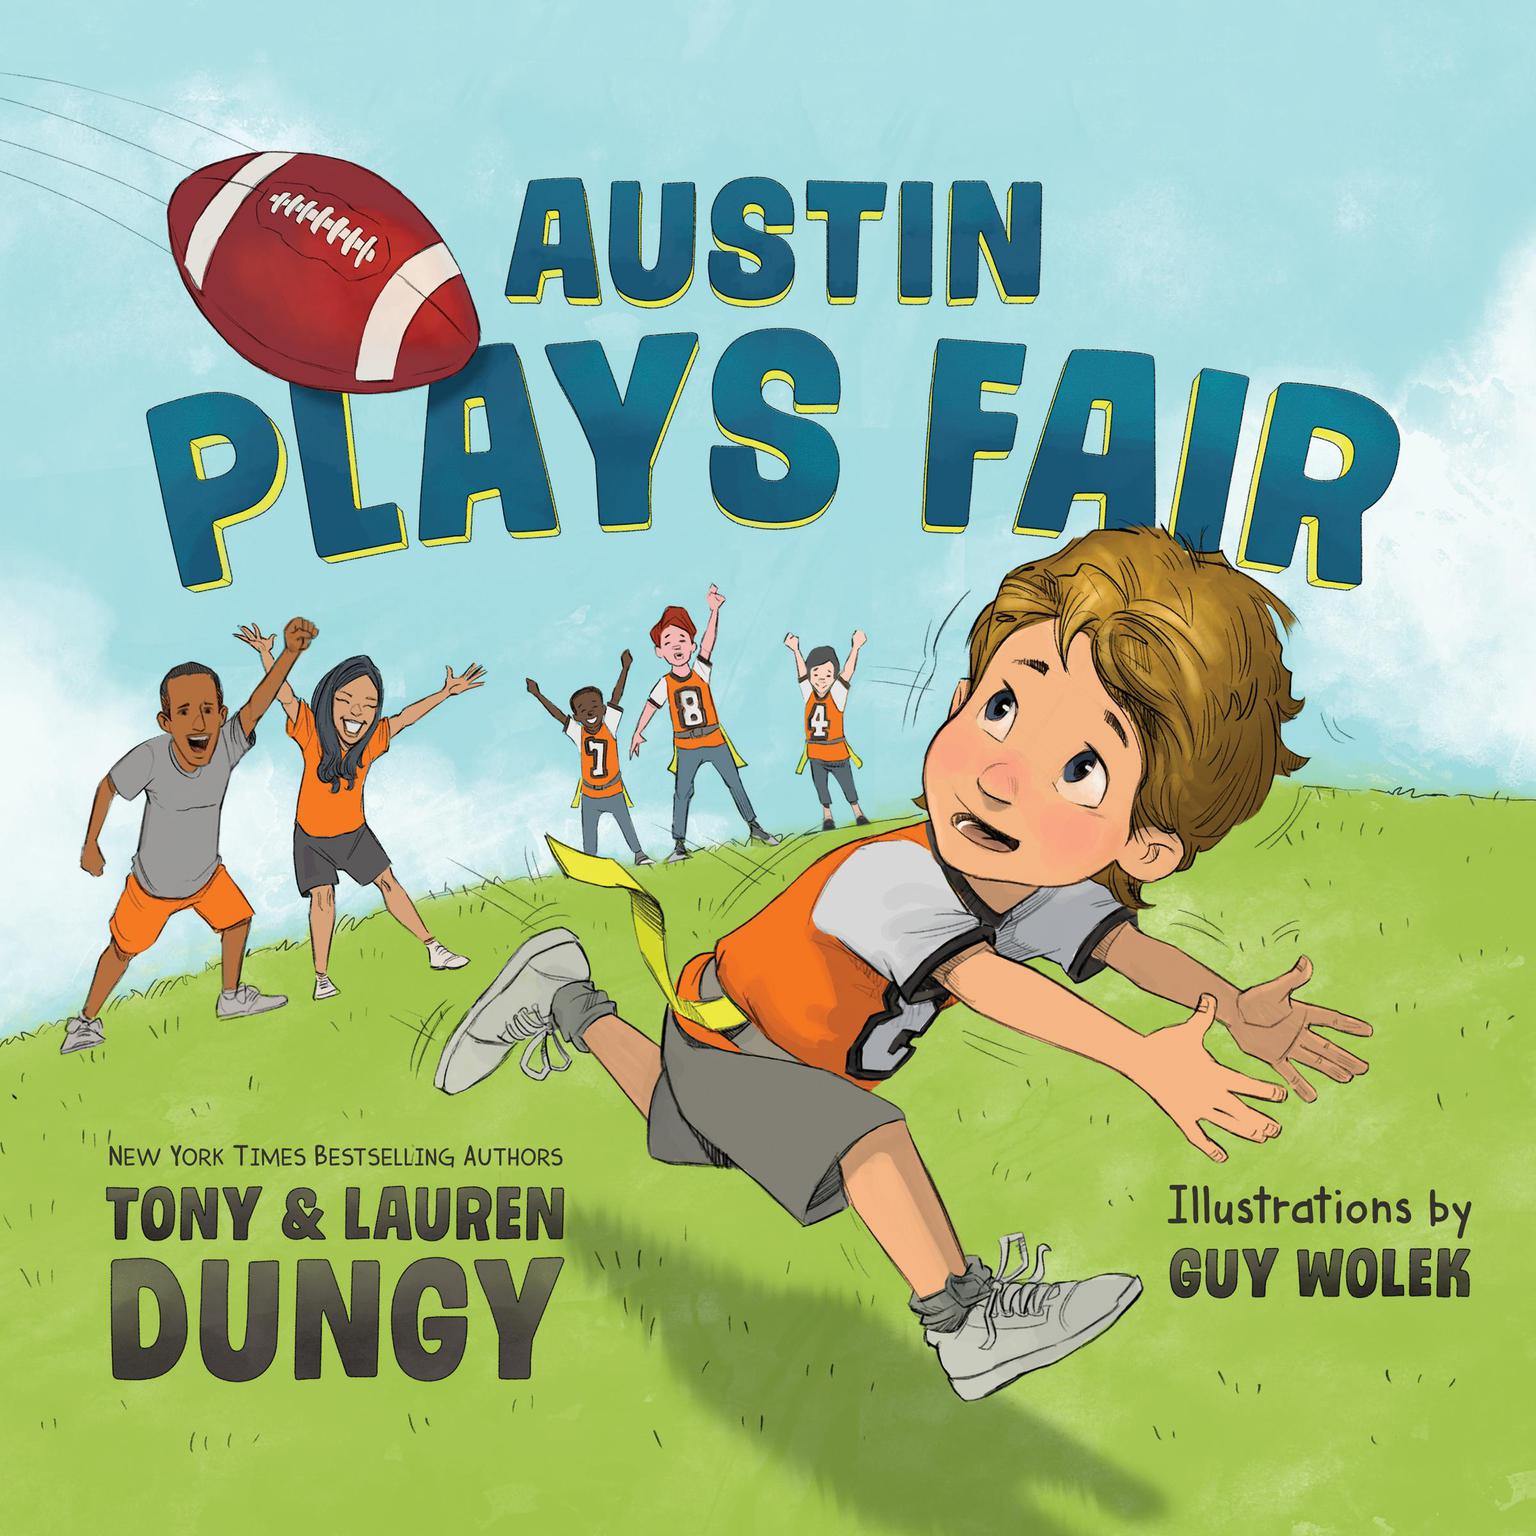 Austin Plays Fair: A Team Dungy Story About Football Audiobook, by Tony Dungy